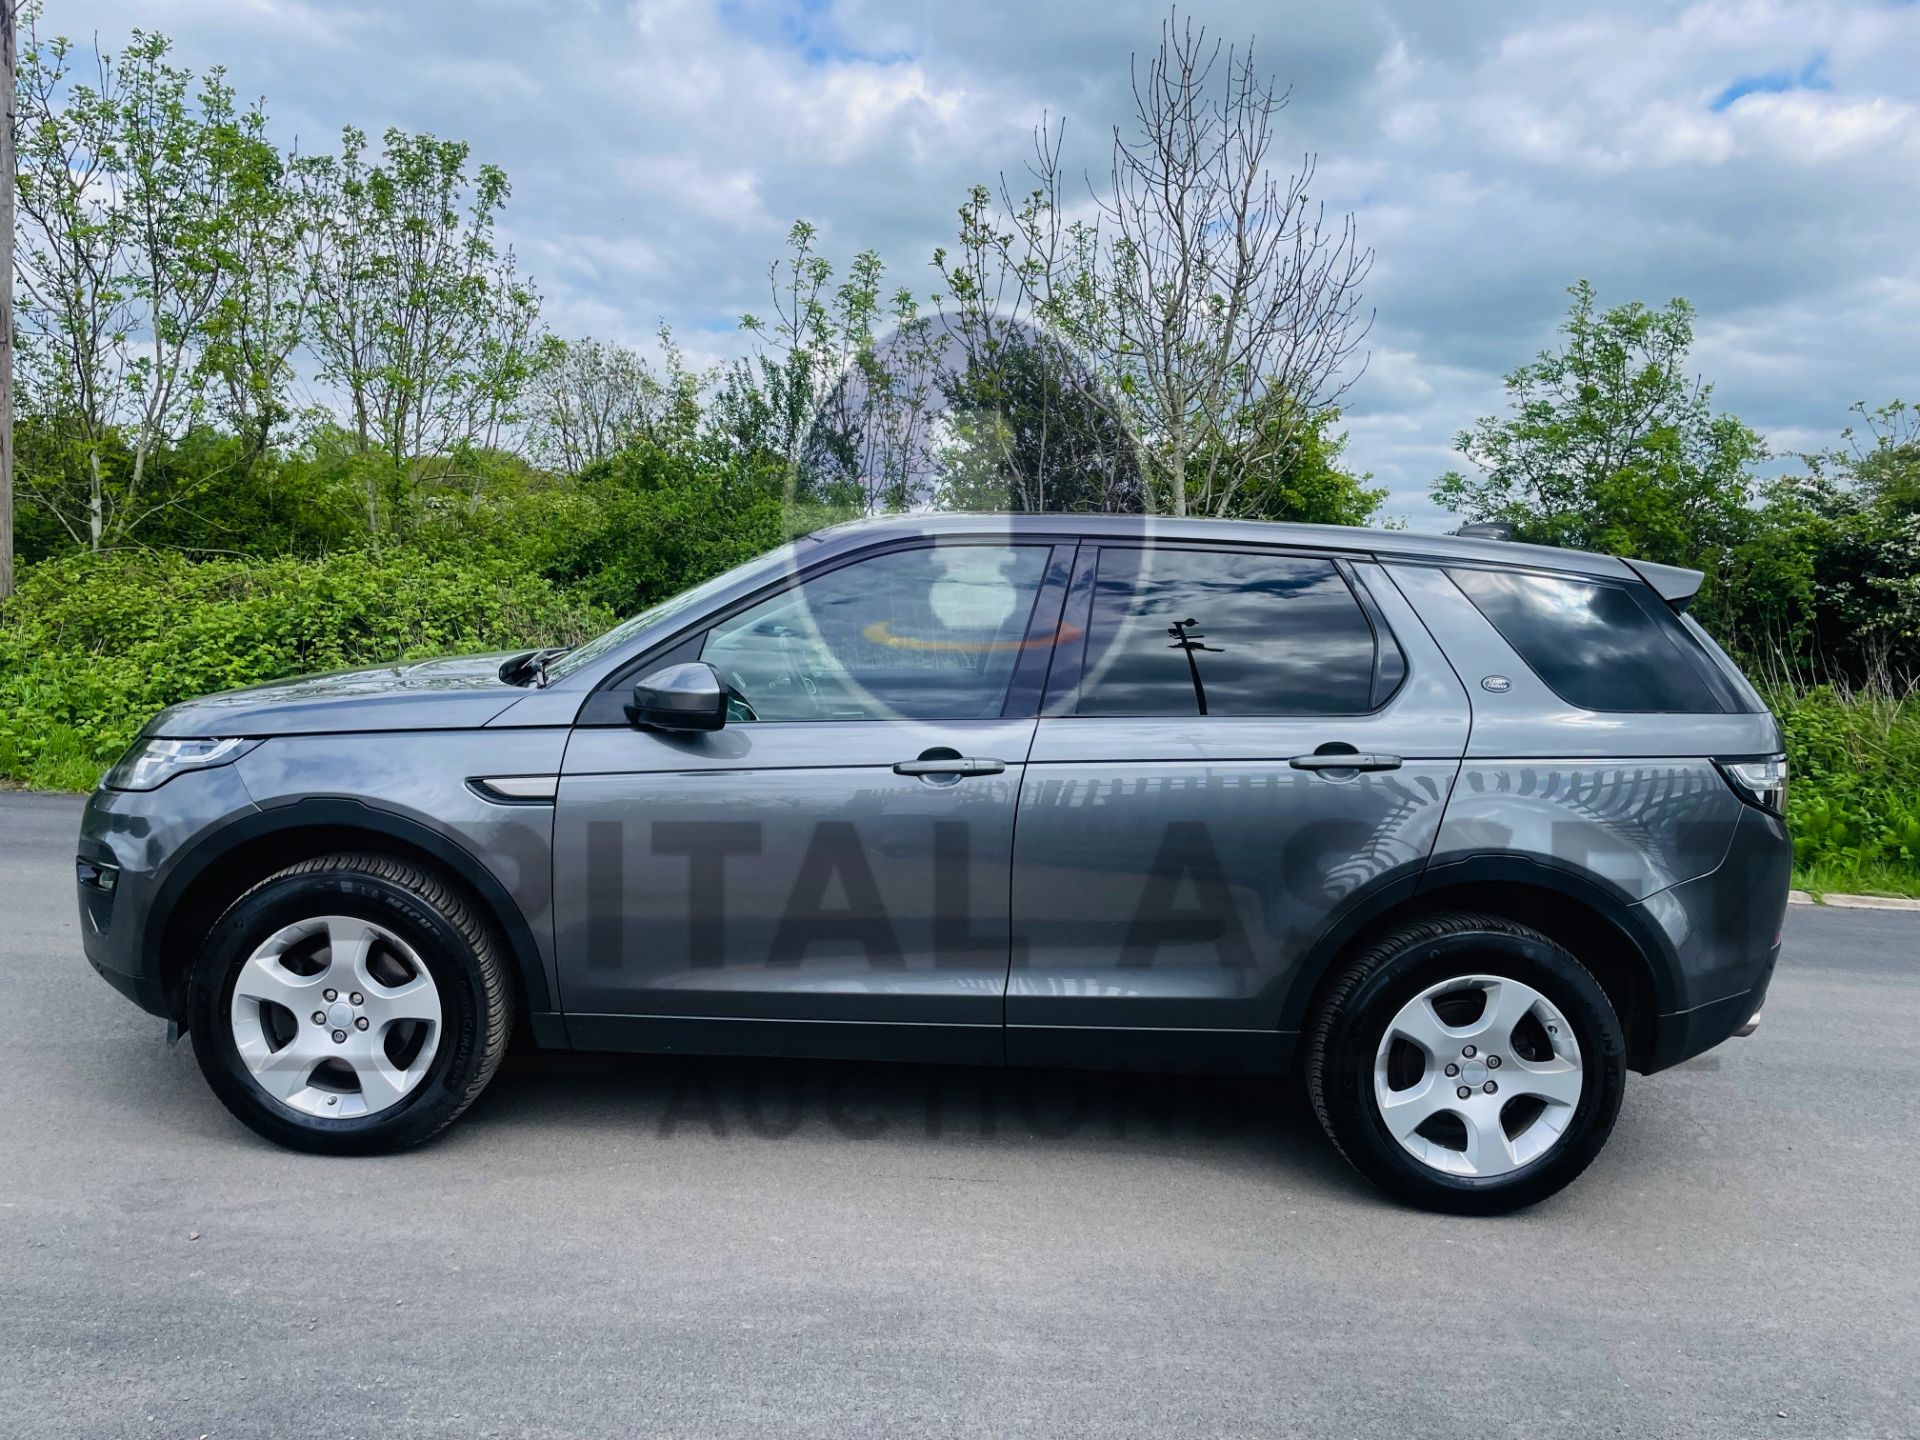 (ON SALE) LAND ROVER DISCOVERY SPORT *SE TECH* SUV (2017 - EURO 6) 2.0 TD4 - AUTO STOP/START(NO VAT) - Image 8 of 51